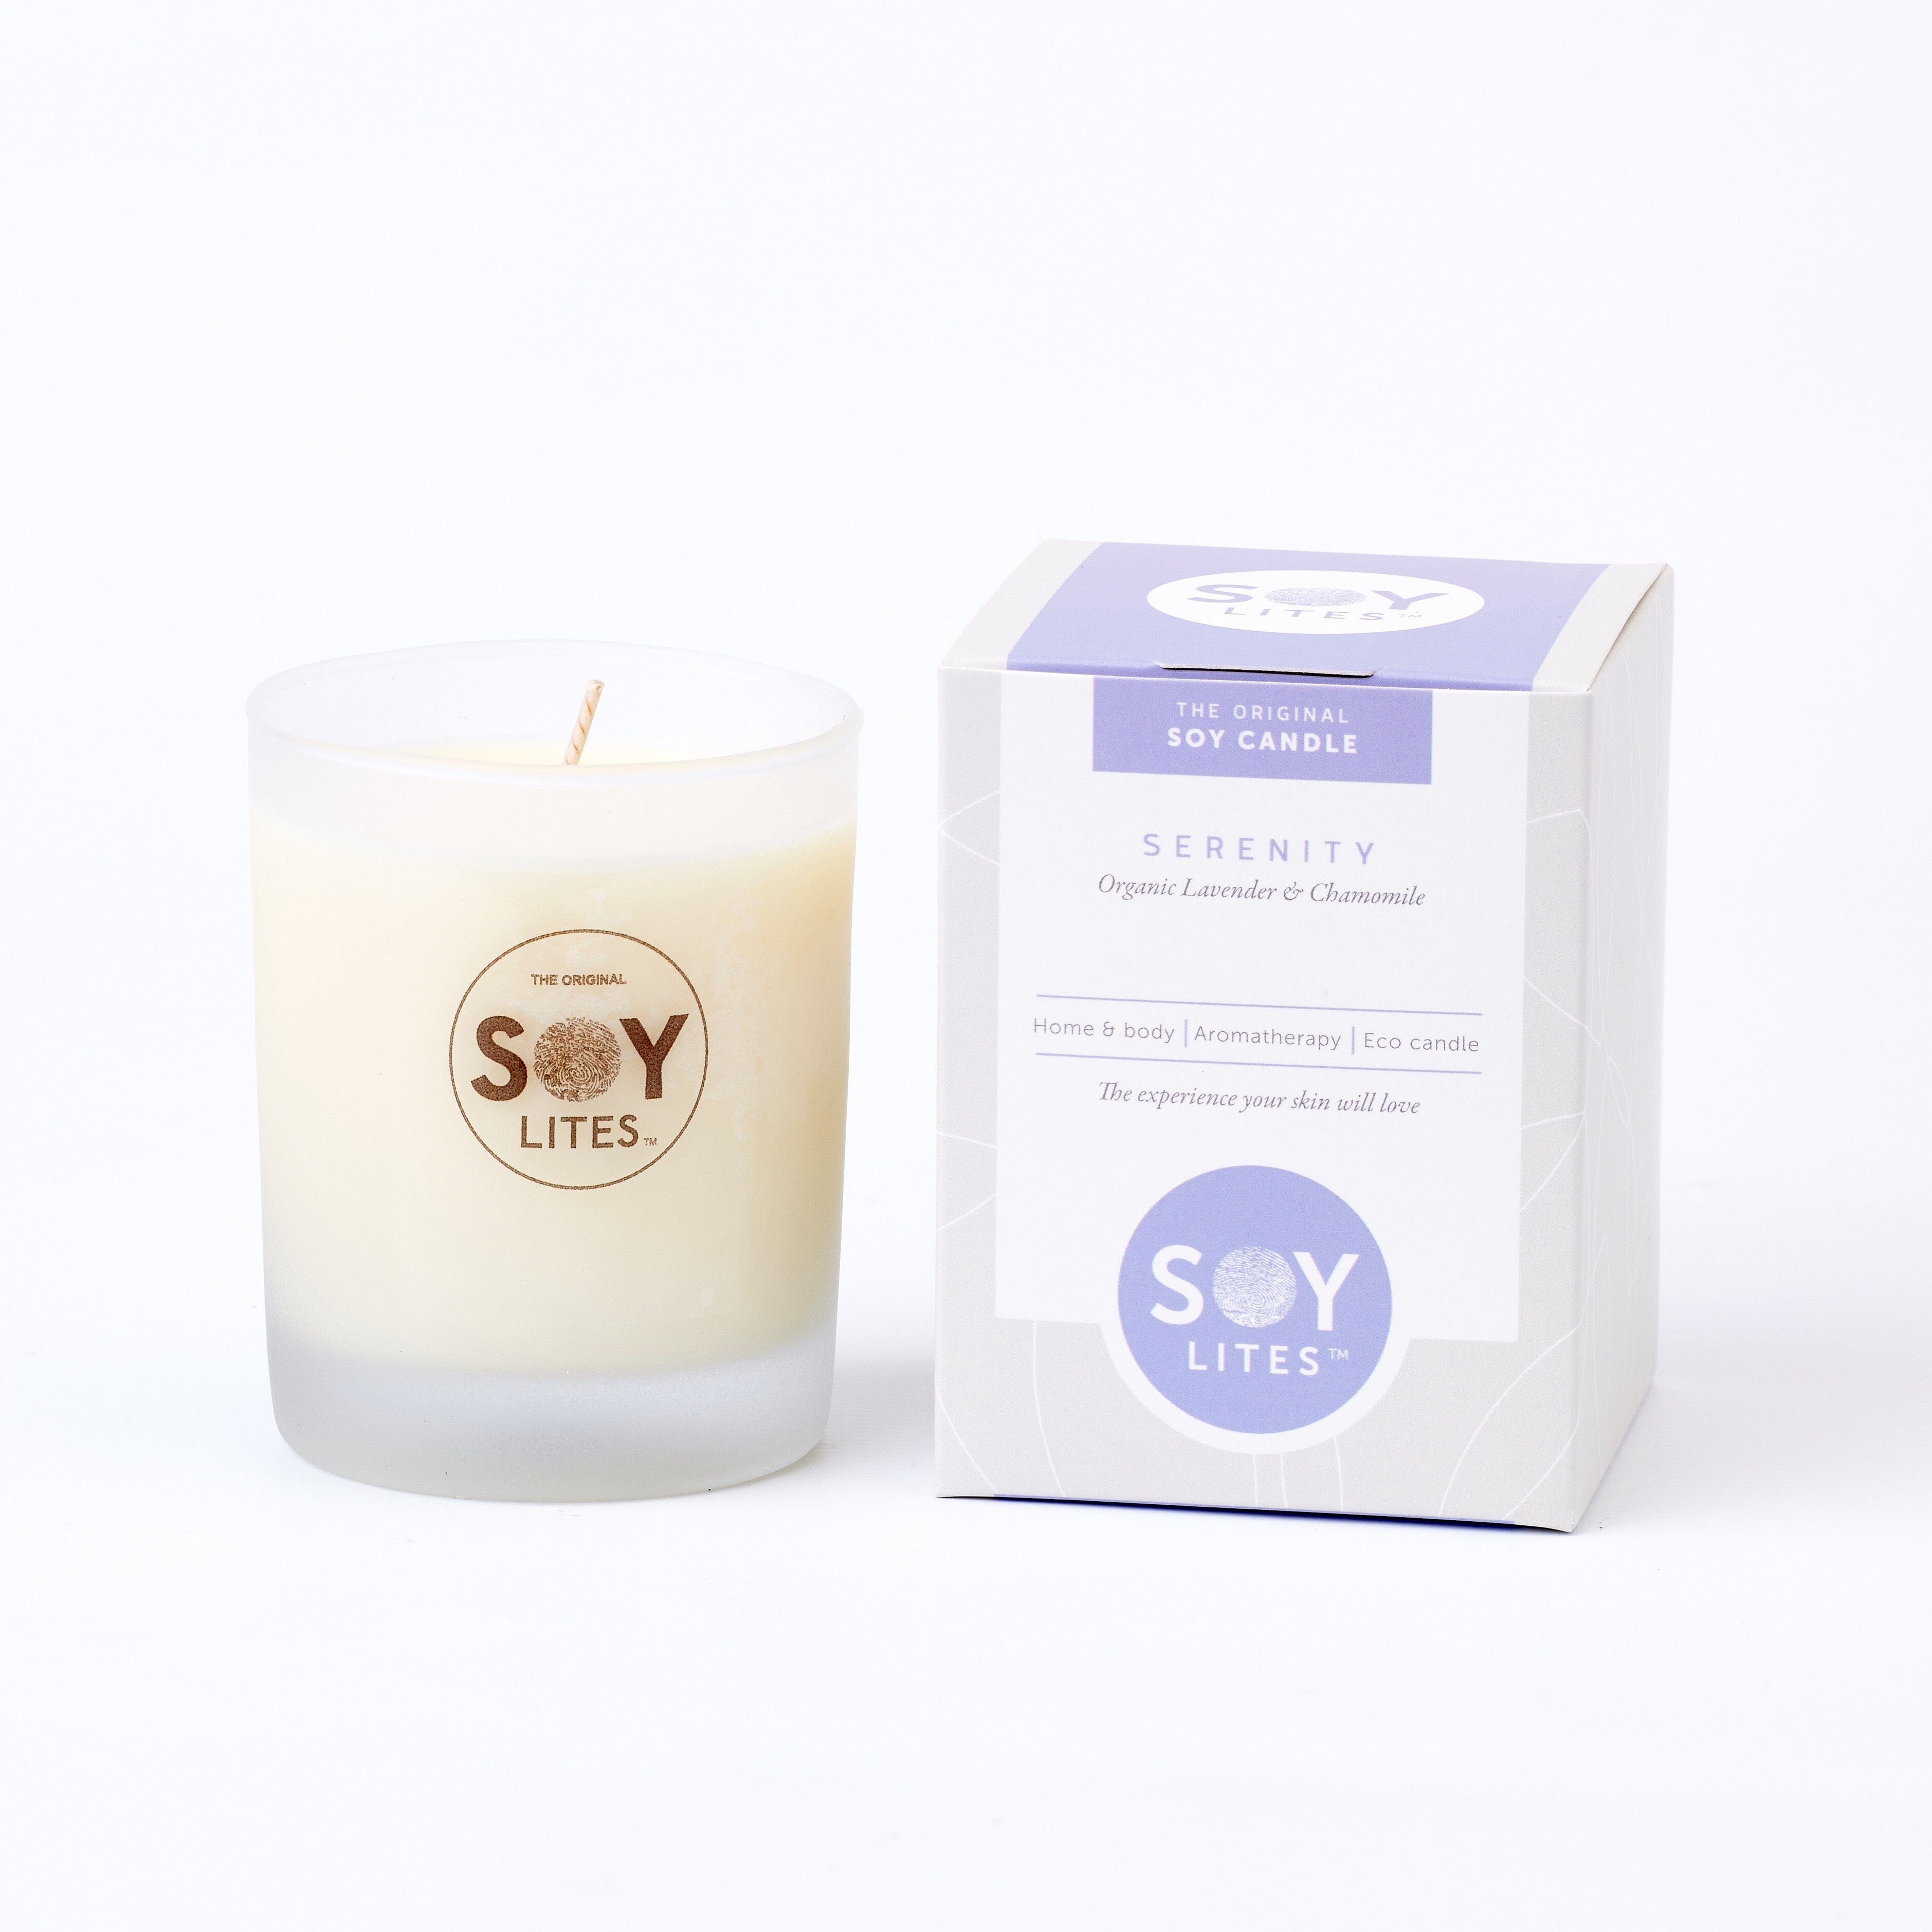 SoyLites 'Serenity' Soy Candle with Lavender & Chamomile Candles SoyLites